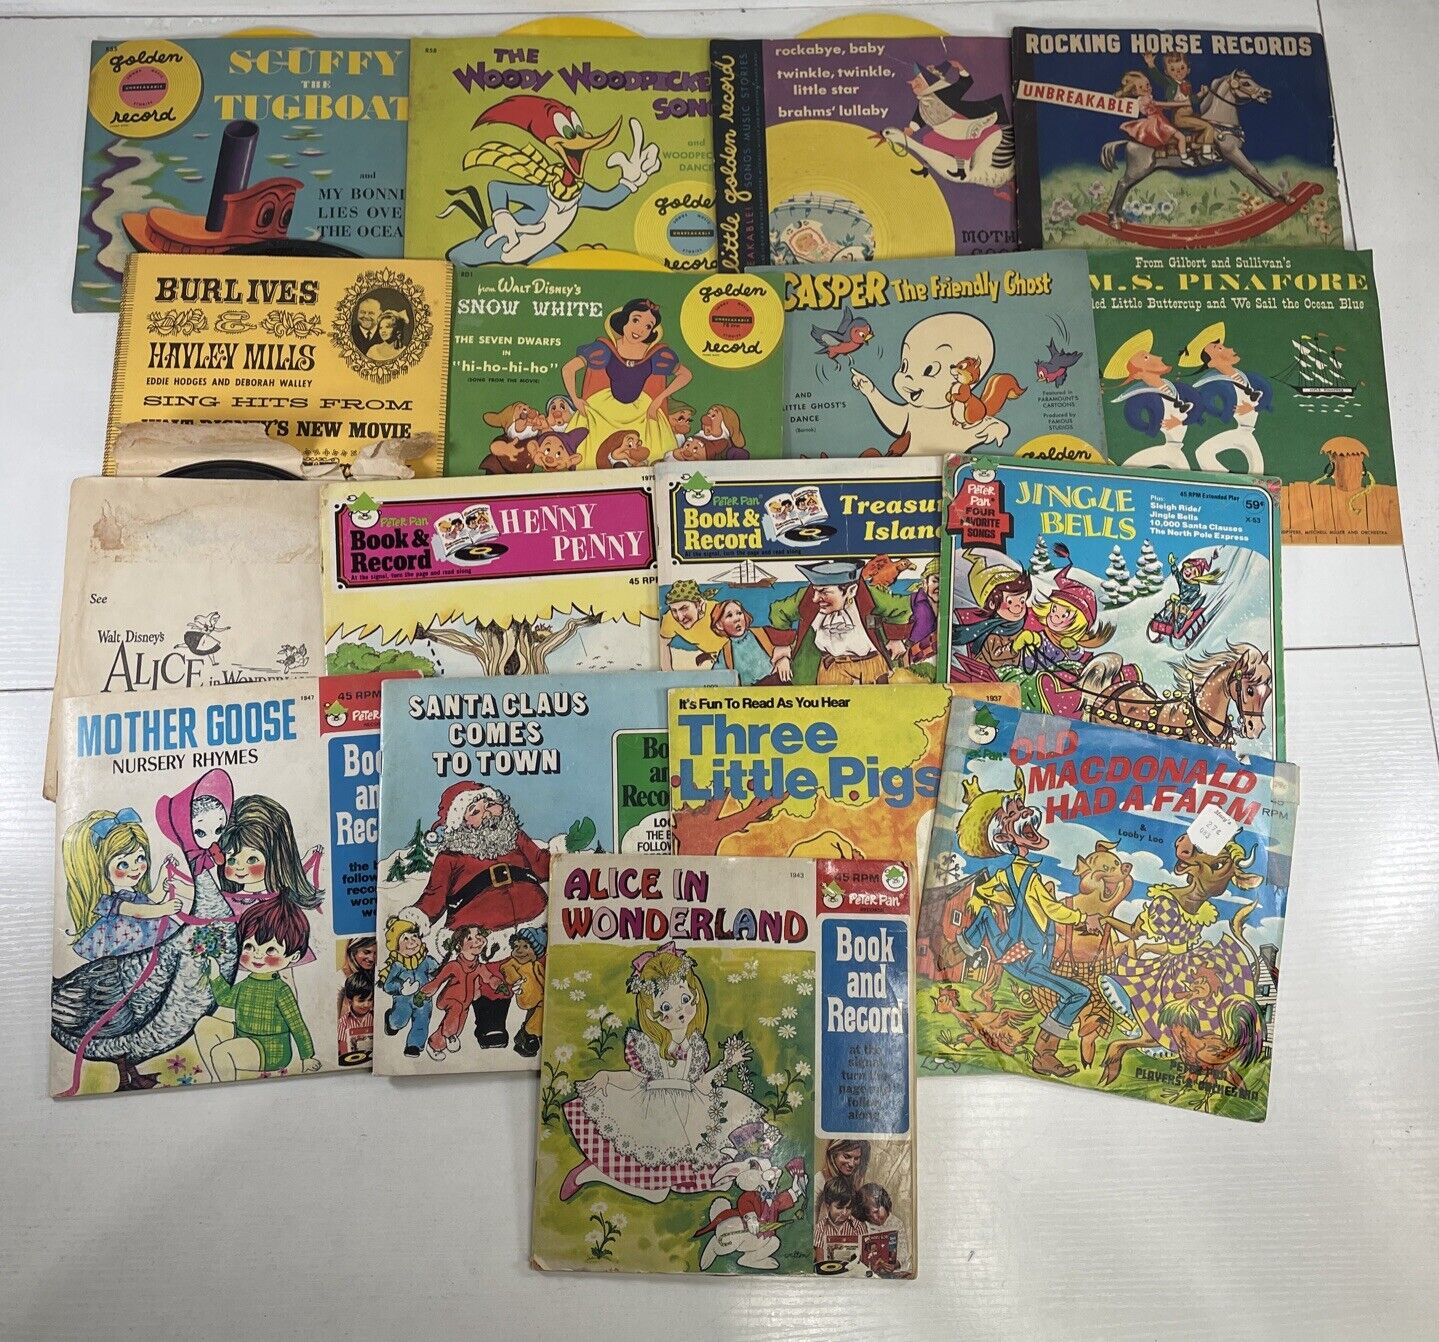 Mixed Lot of 17 Vintage GOLDEN RECORDS 78 RPM Children's Records